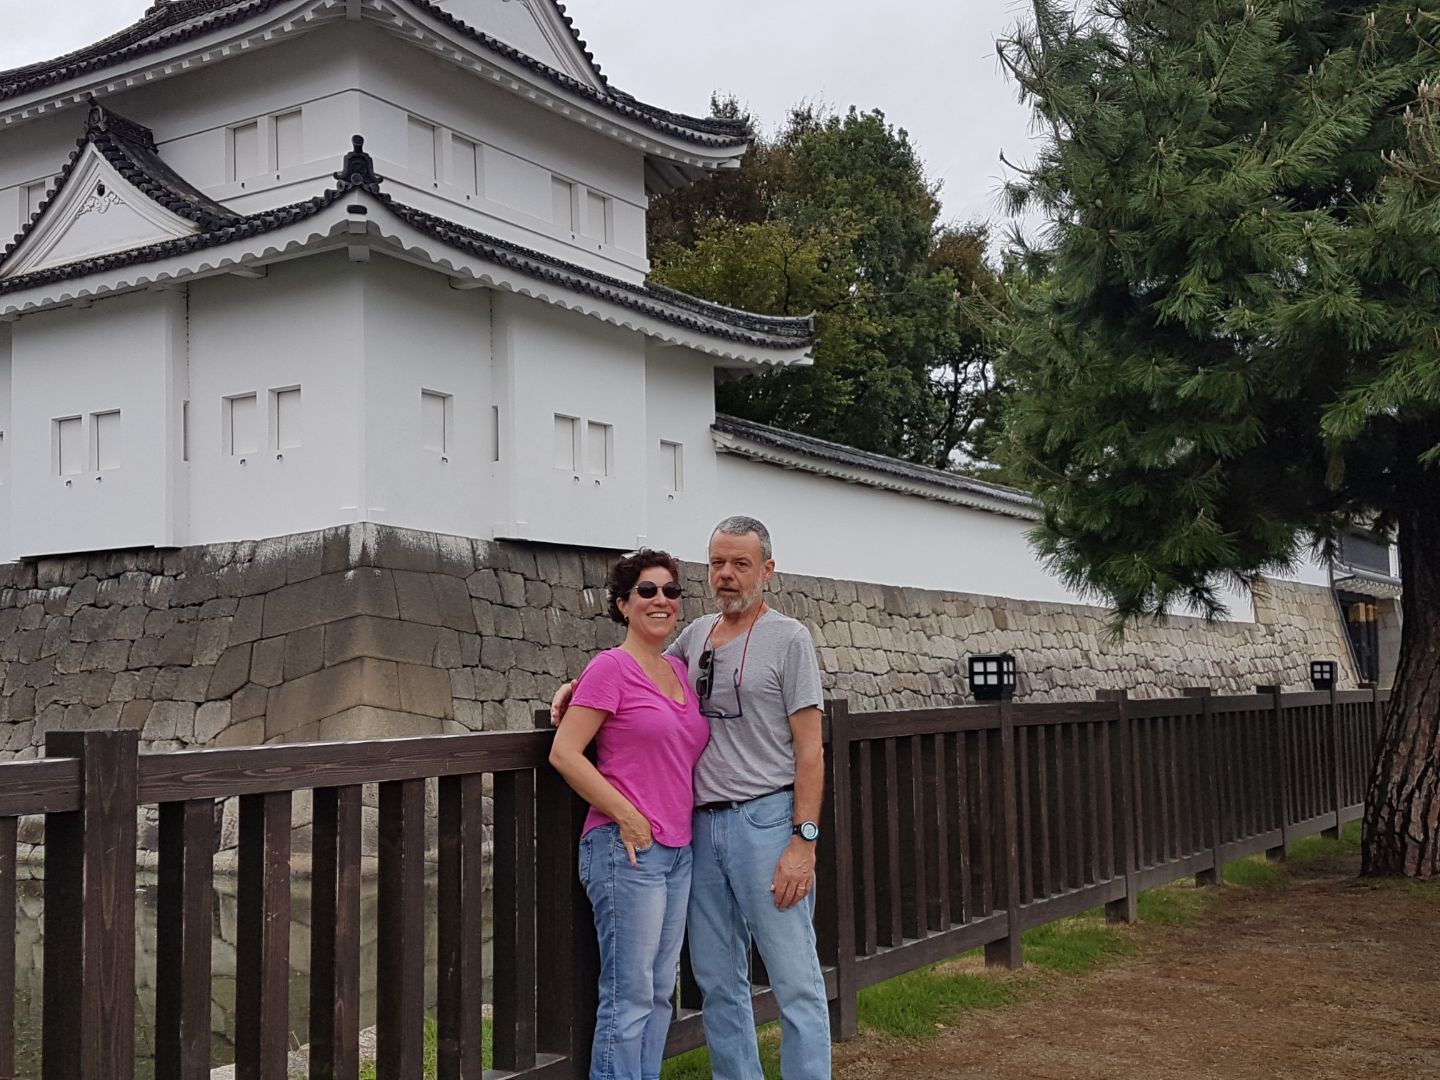 David and Leisa posing in front of an asian style building.